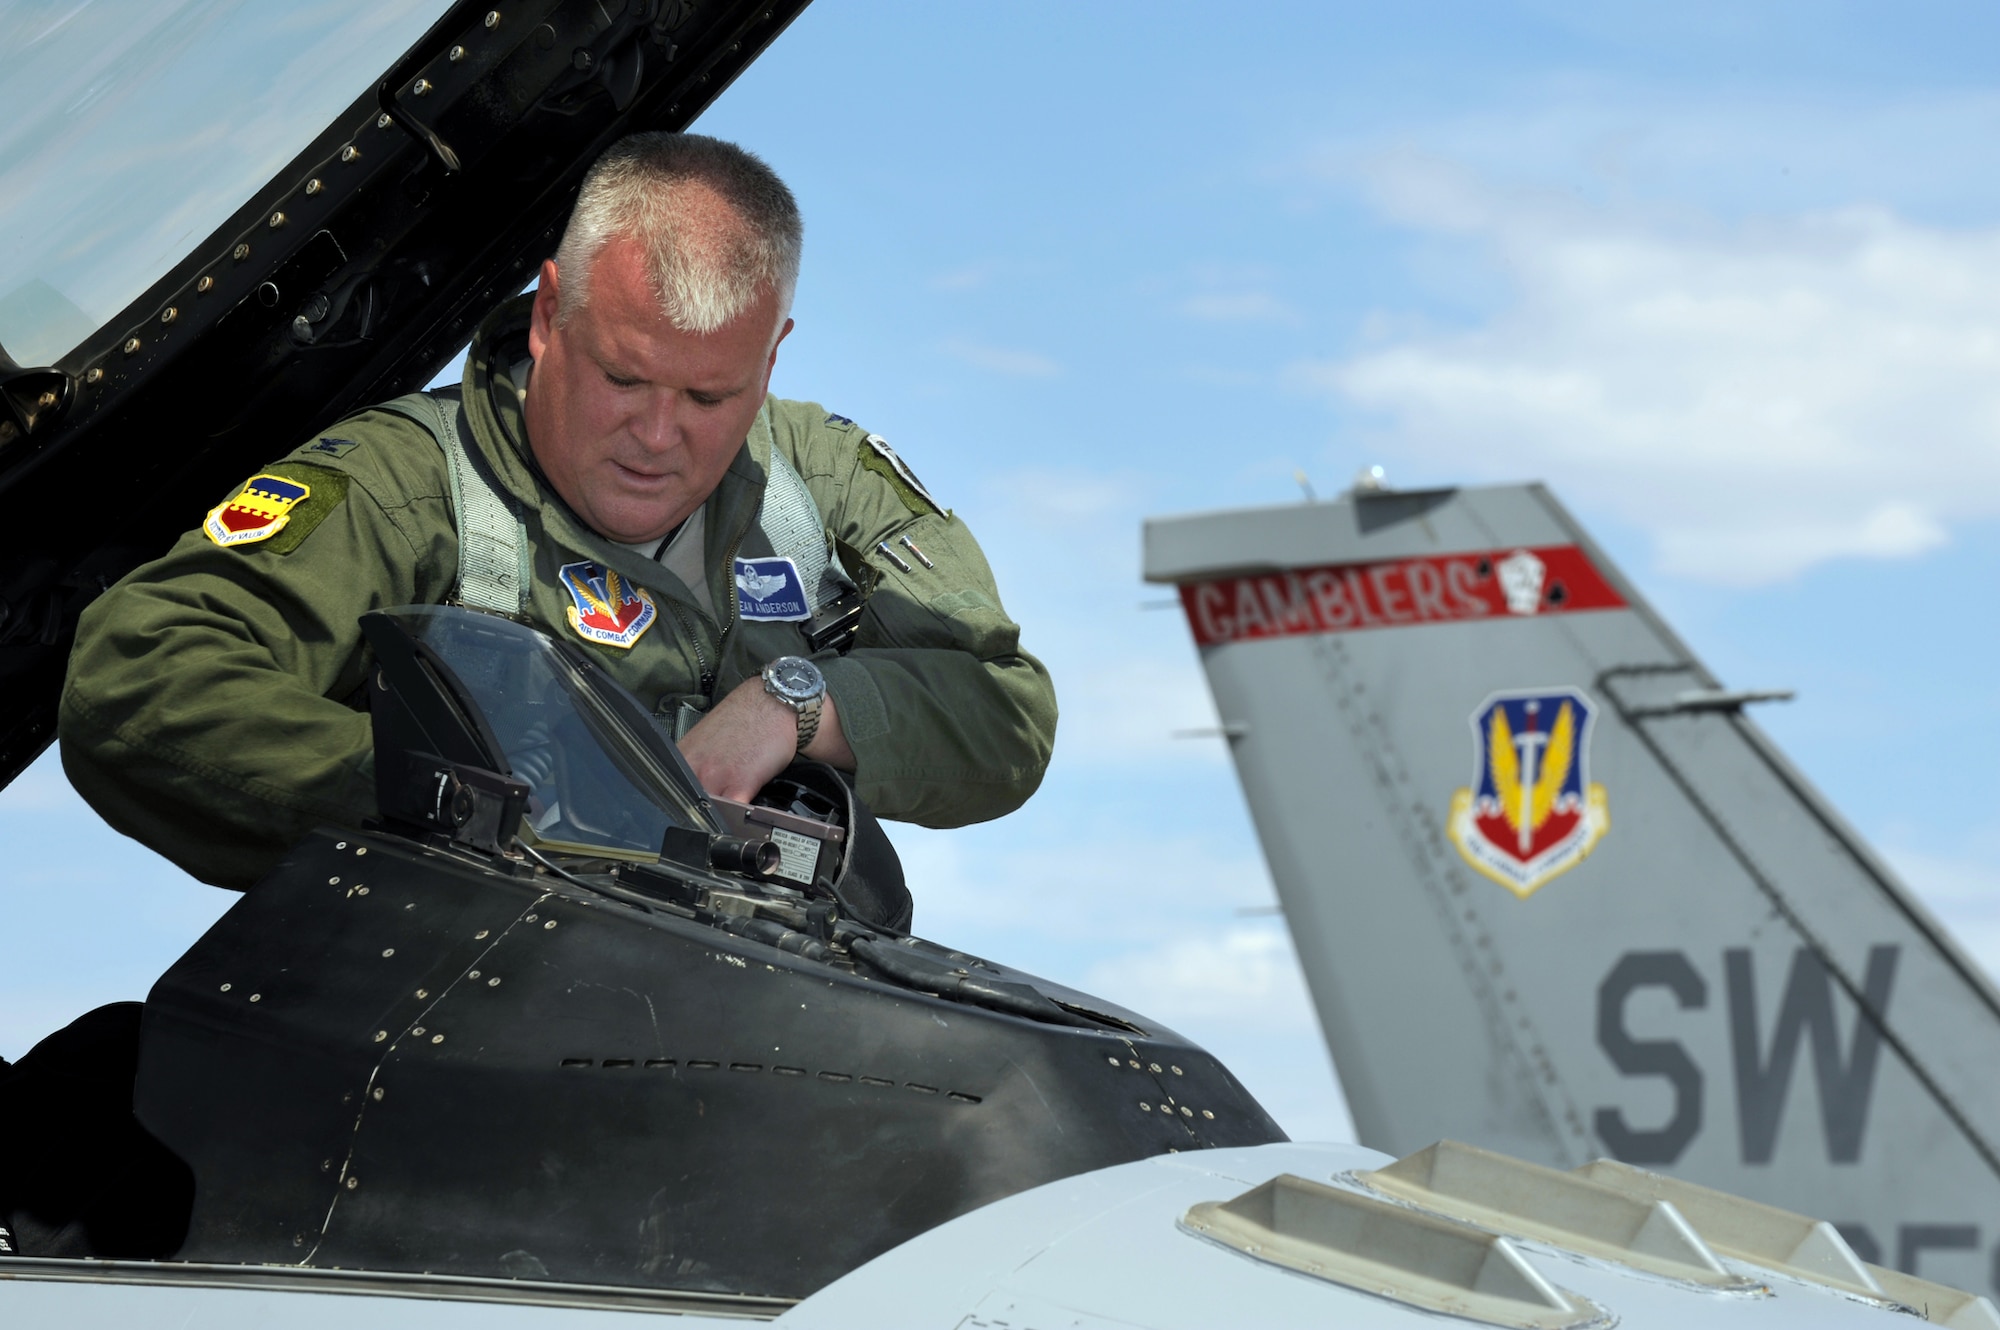 Colonel Dean "Norm" Anderson, 20th Fighter Wing vice commander at Shaw Air Force Base, S.C., climbs into an F-16CJ for a training mission at Nellis AFB, Nev., July 22, 2009.  Col. Anderson has the unique opportunity to fly, and command with his brother Lt. Col. Ross "Rosco" Anderson at the Red Flag 09-4 exercise in Las Vegas.  Col. Anderson, serving as the Red Flag AEW commander, and Lt. Col. Anderson, as the Red Flag AEW Operations Group commander.  (U.S. Air Force photo/Tech. Sgt. Michael R. Holzworth) 
